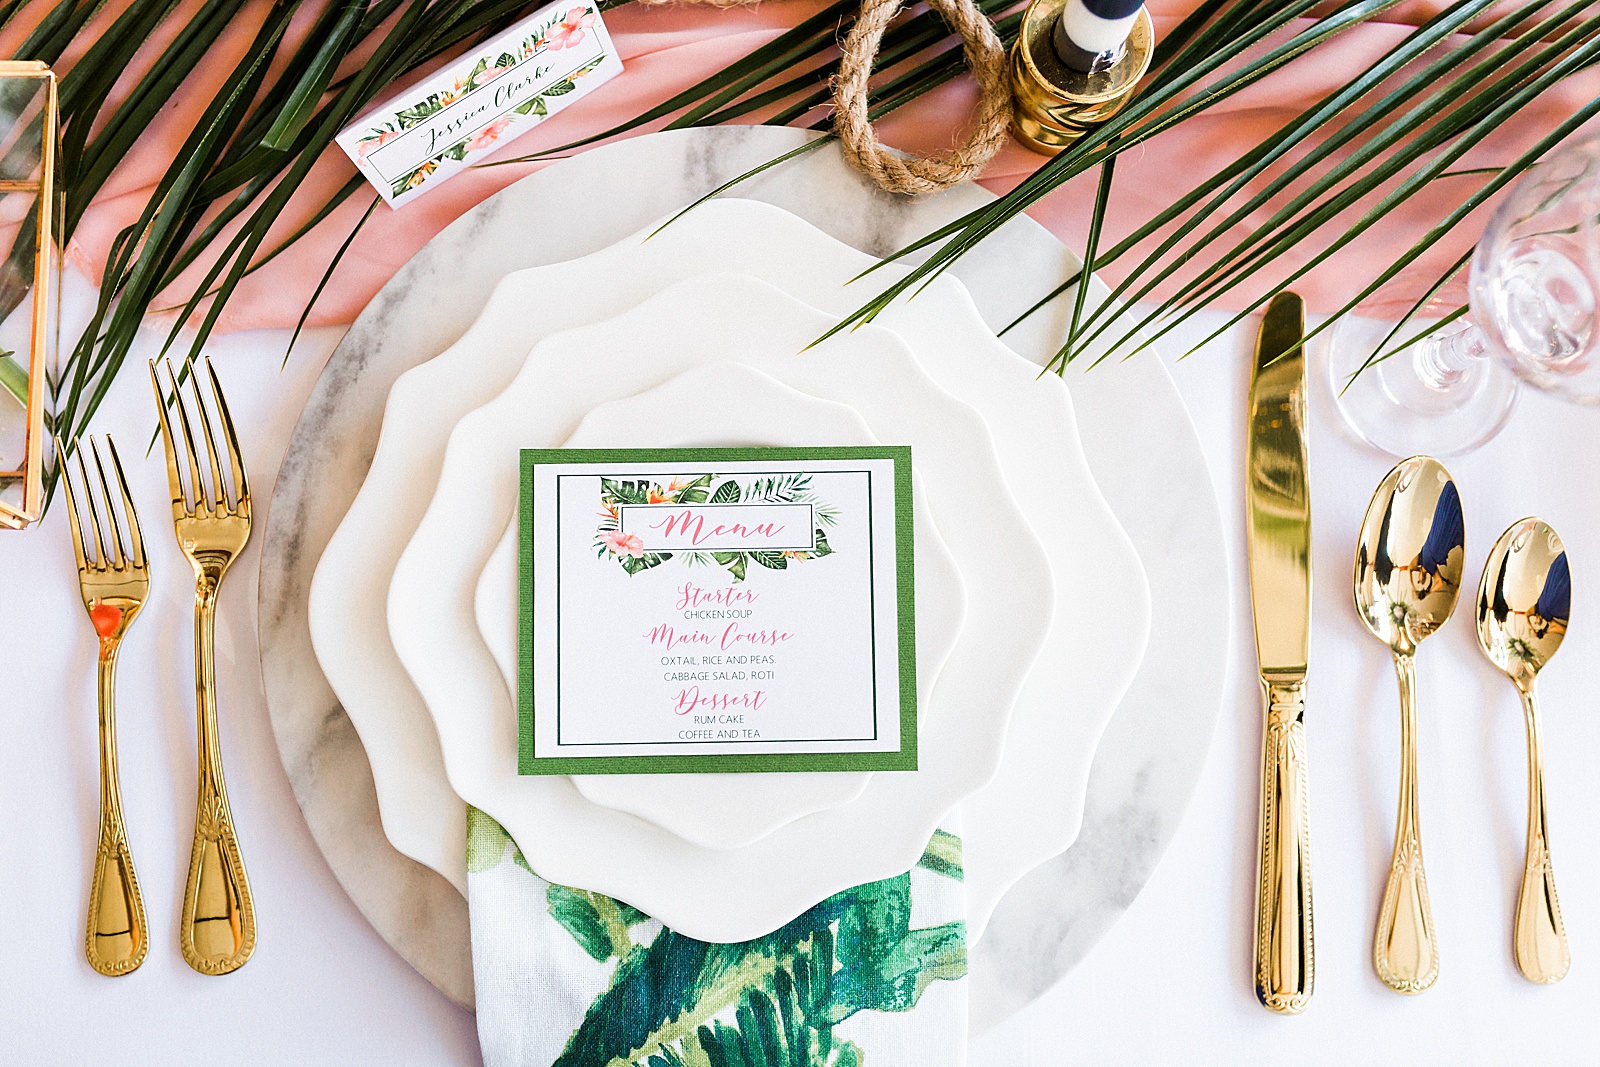 Tropical menu cards and table setting